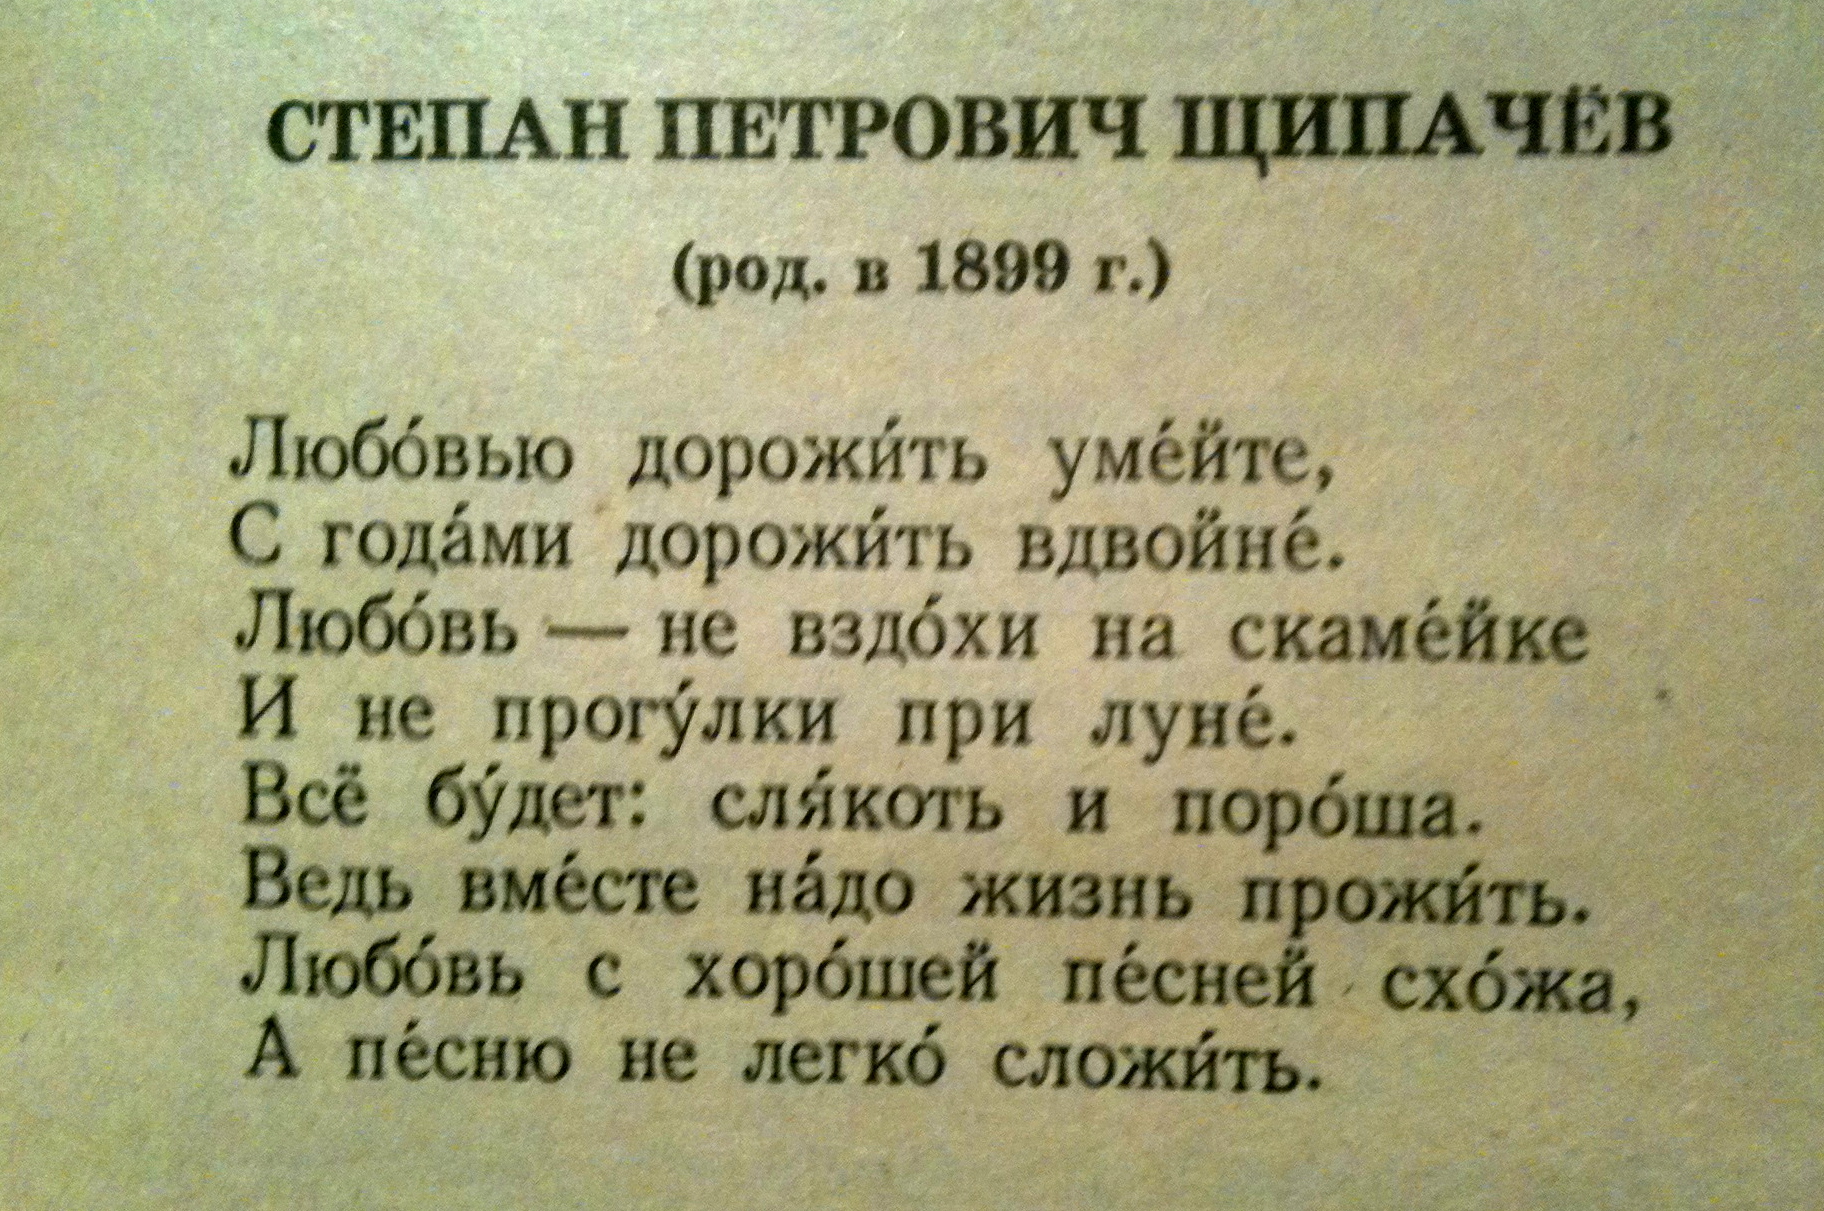 Russian Love Poem From 71